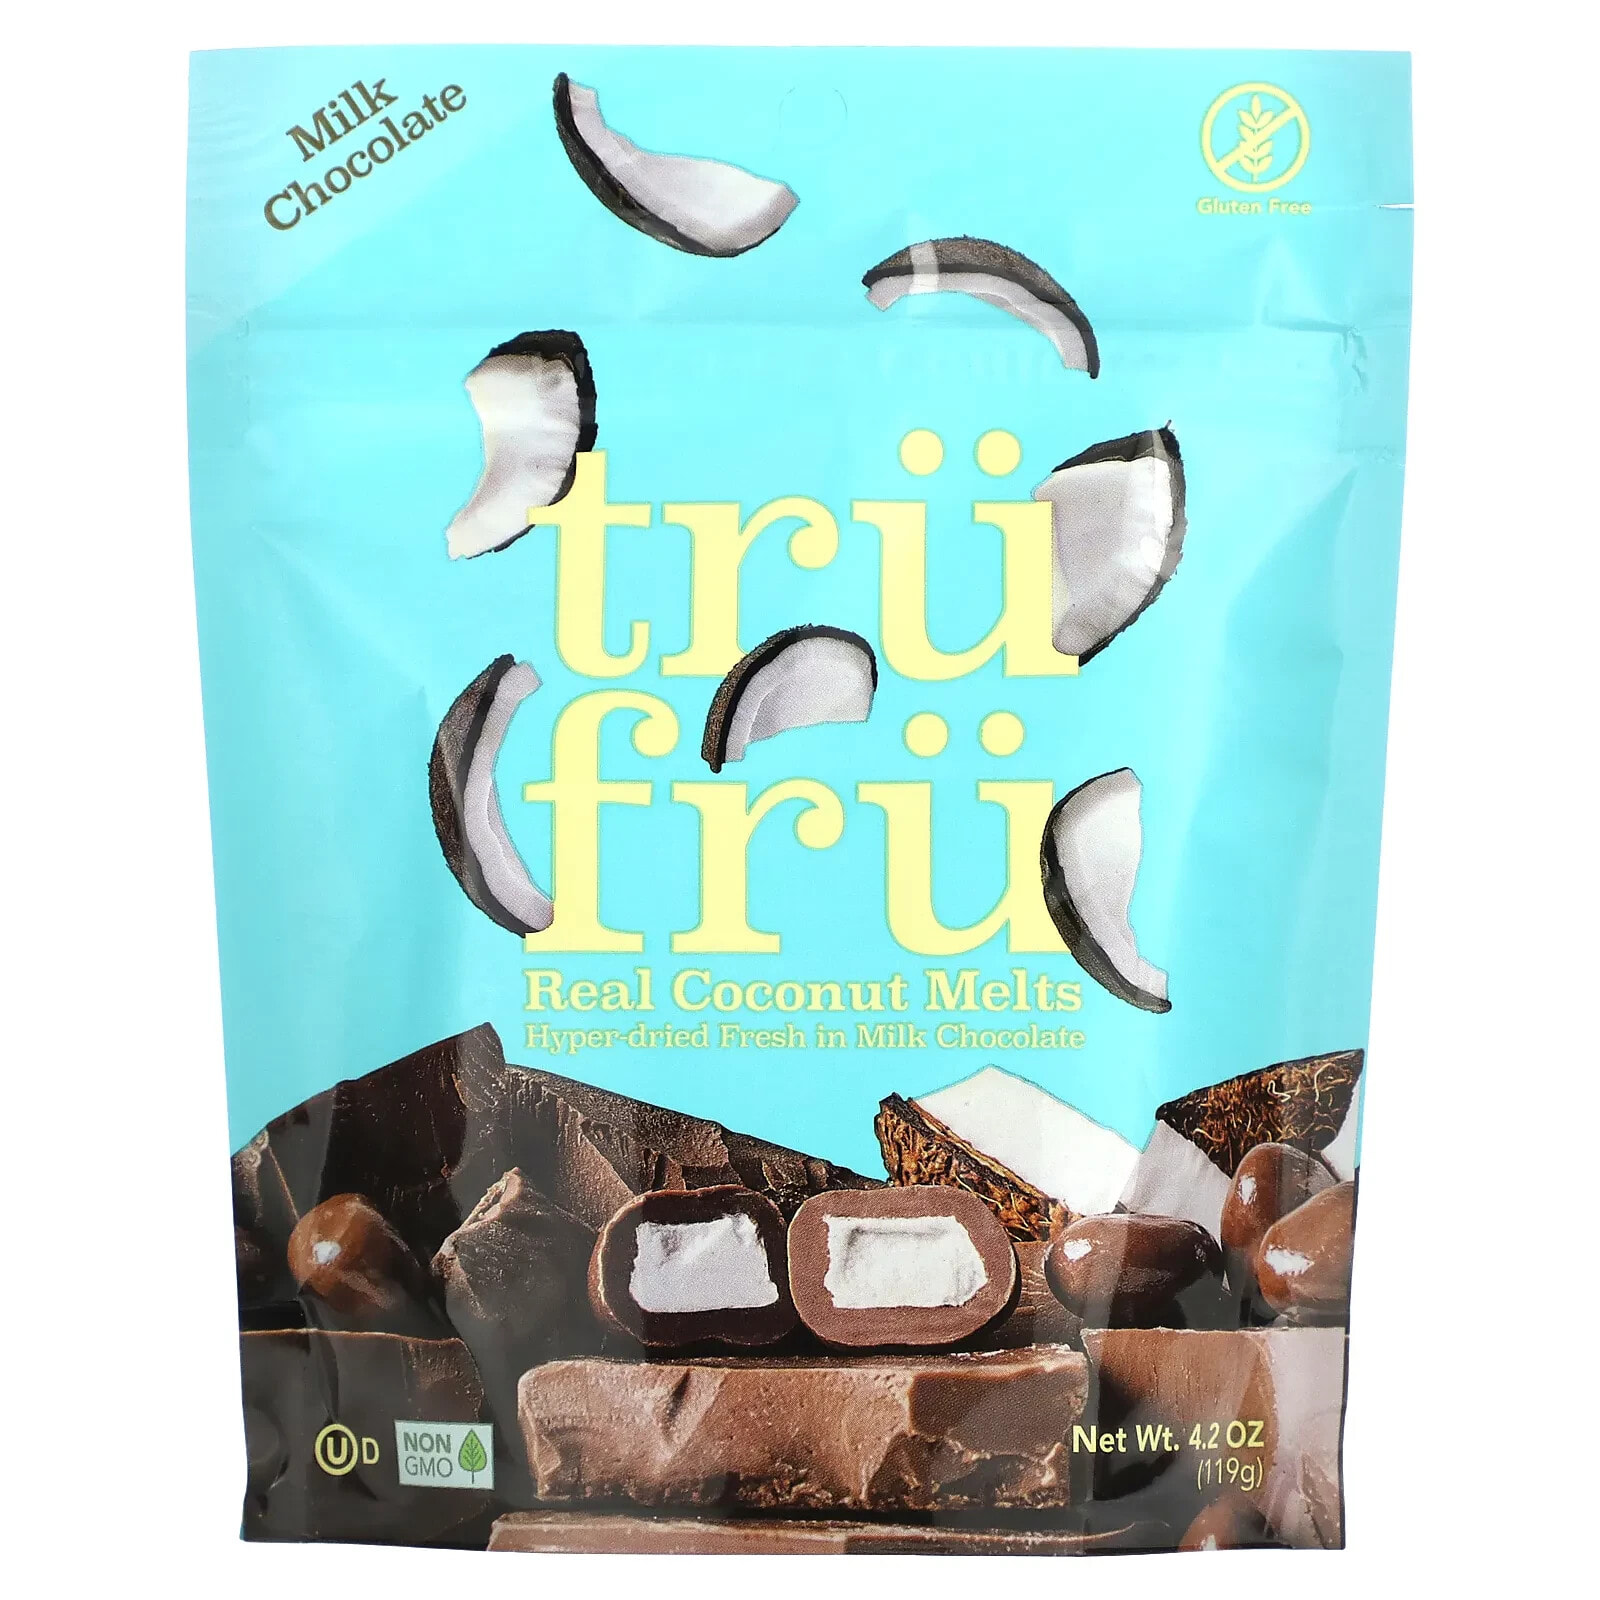 Real Coconut Melts, Milk Chocolate, 4.2 oz (119 g)